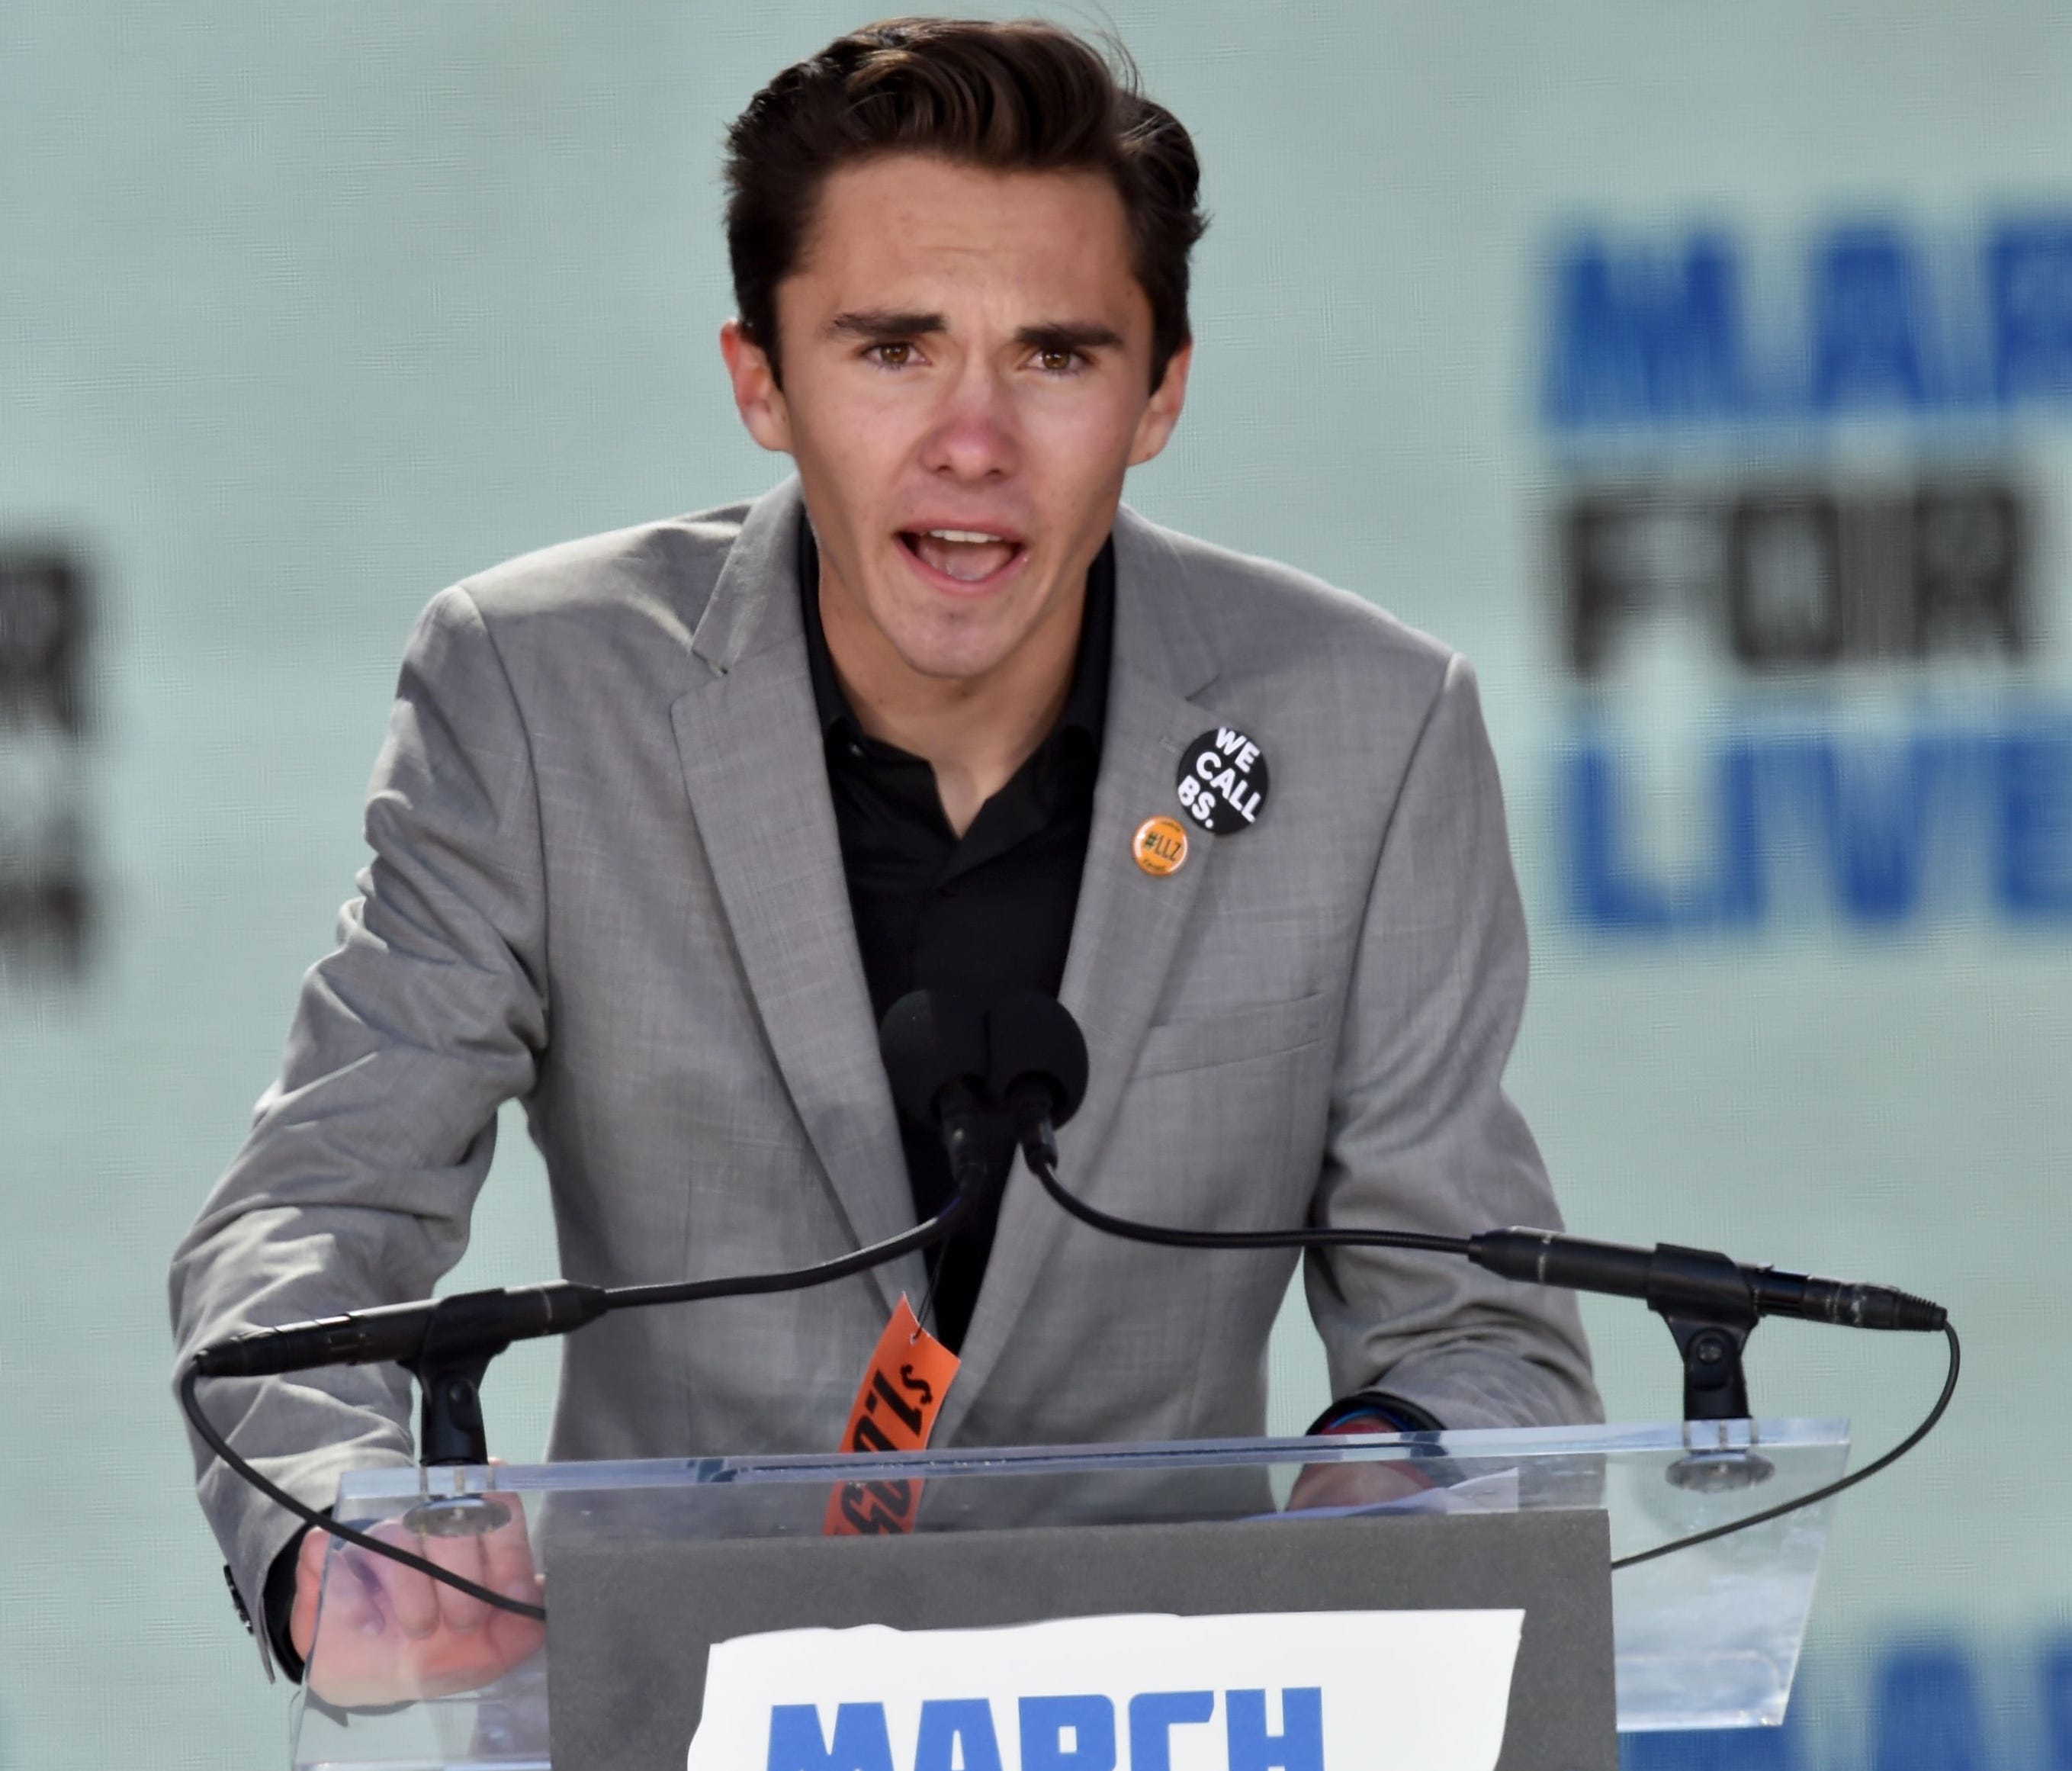 Marjory Stoneman Douglas High School student David Hogg speaks during the March for Our Lives Rally in Washington.